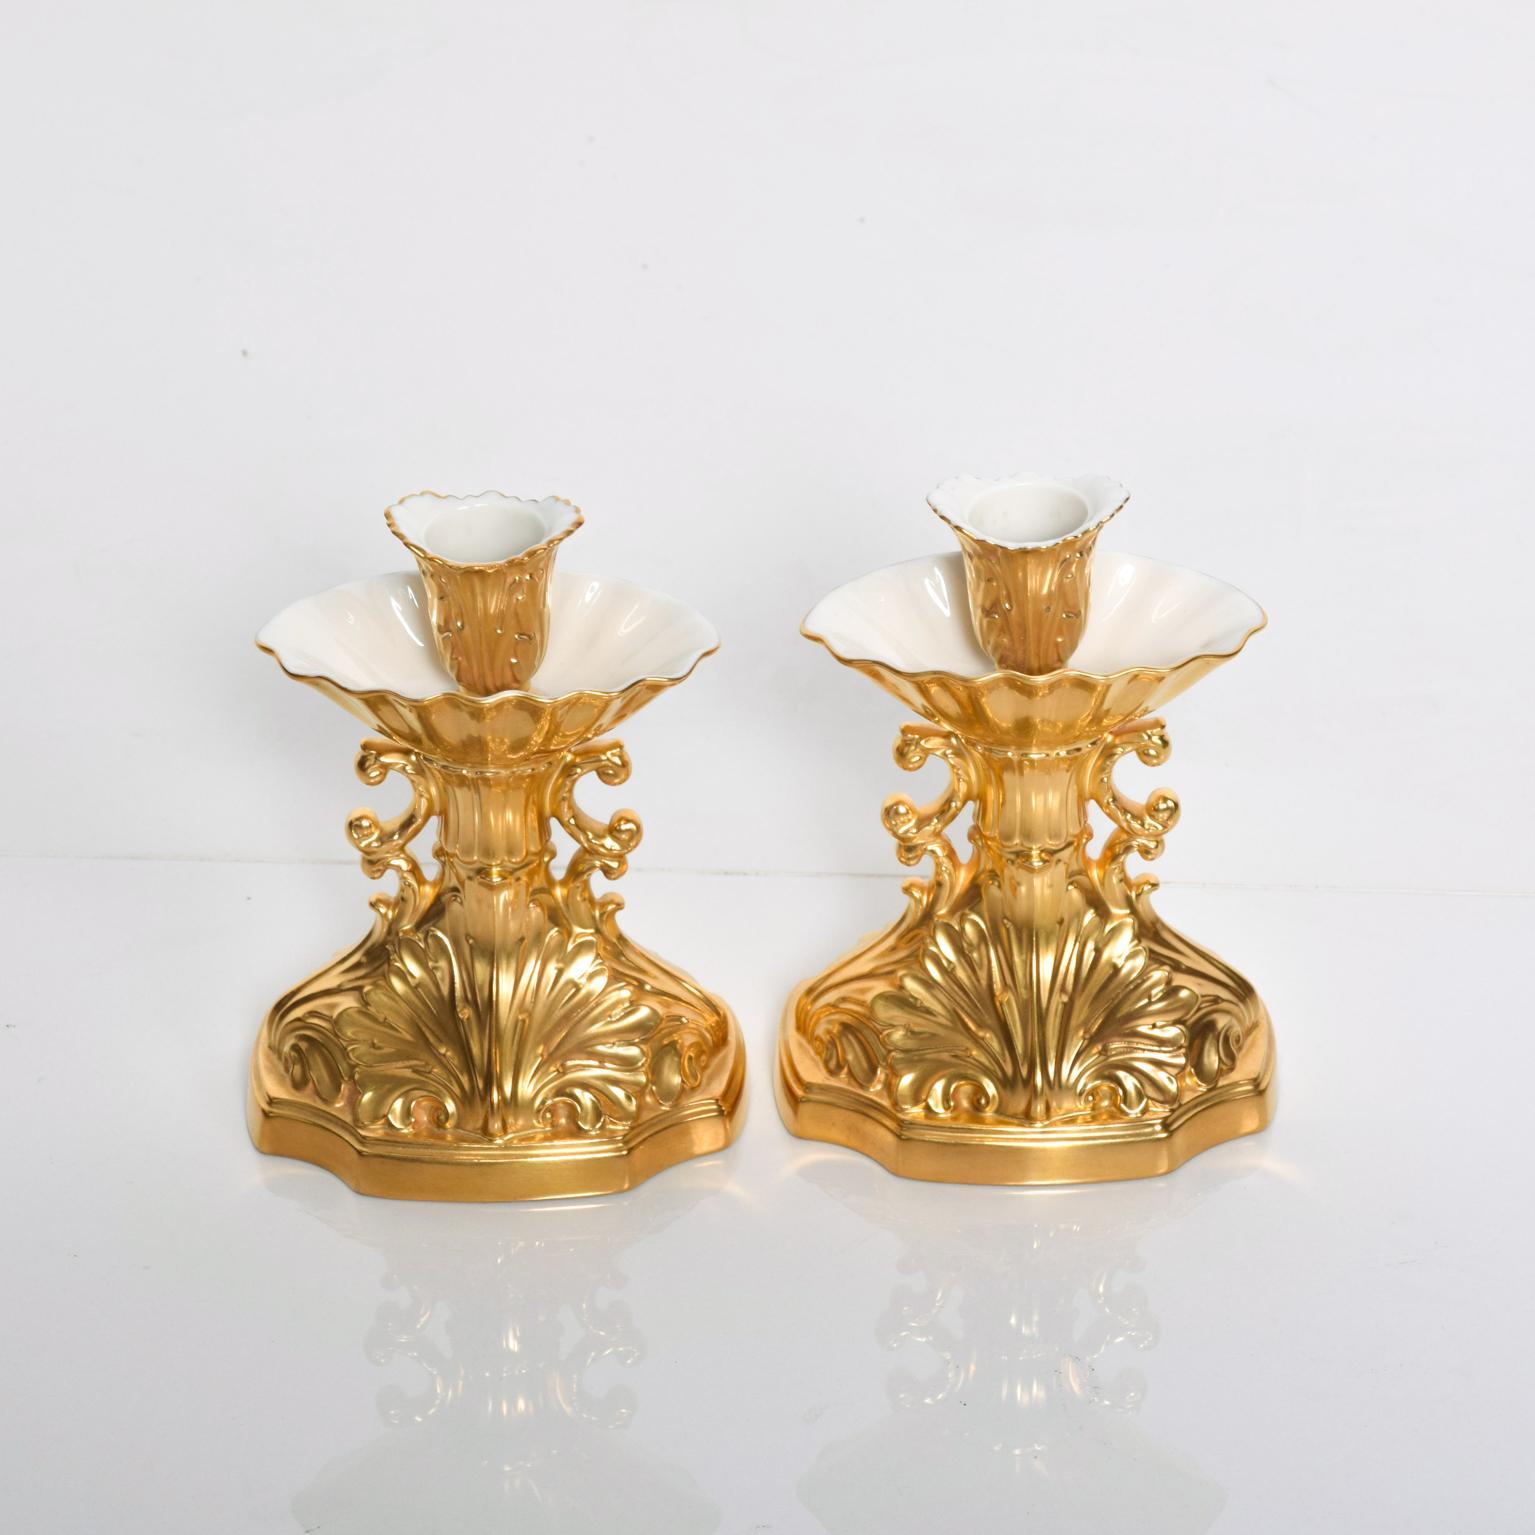 For Your Consideration: Vintage LENOX 24k Gold Trimmed Candle Holders Designer's Collection Aquarius. Mid Century 1960s.
See Separate listing for more pieces to this fine collection.
In Original Excellent Vintage Condition.
Dimensions are: 6